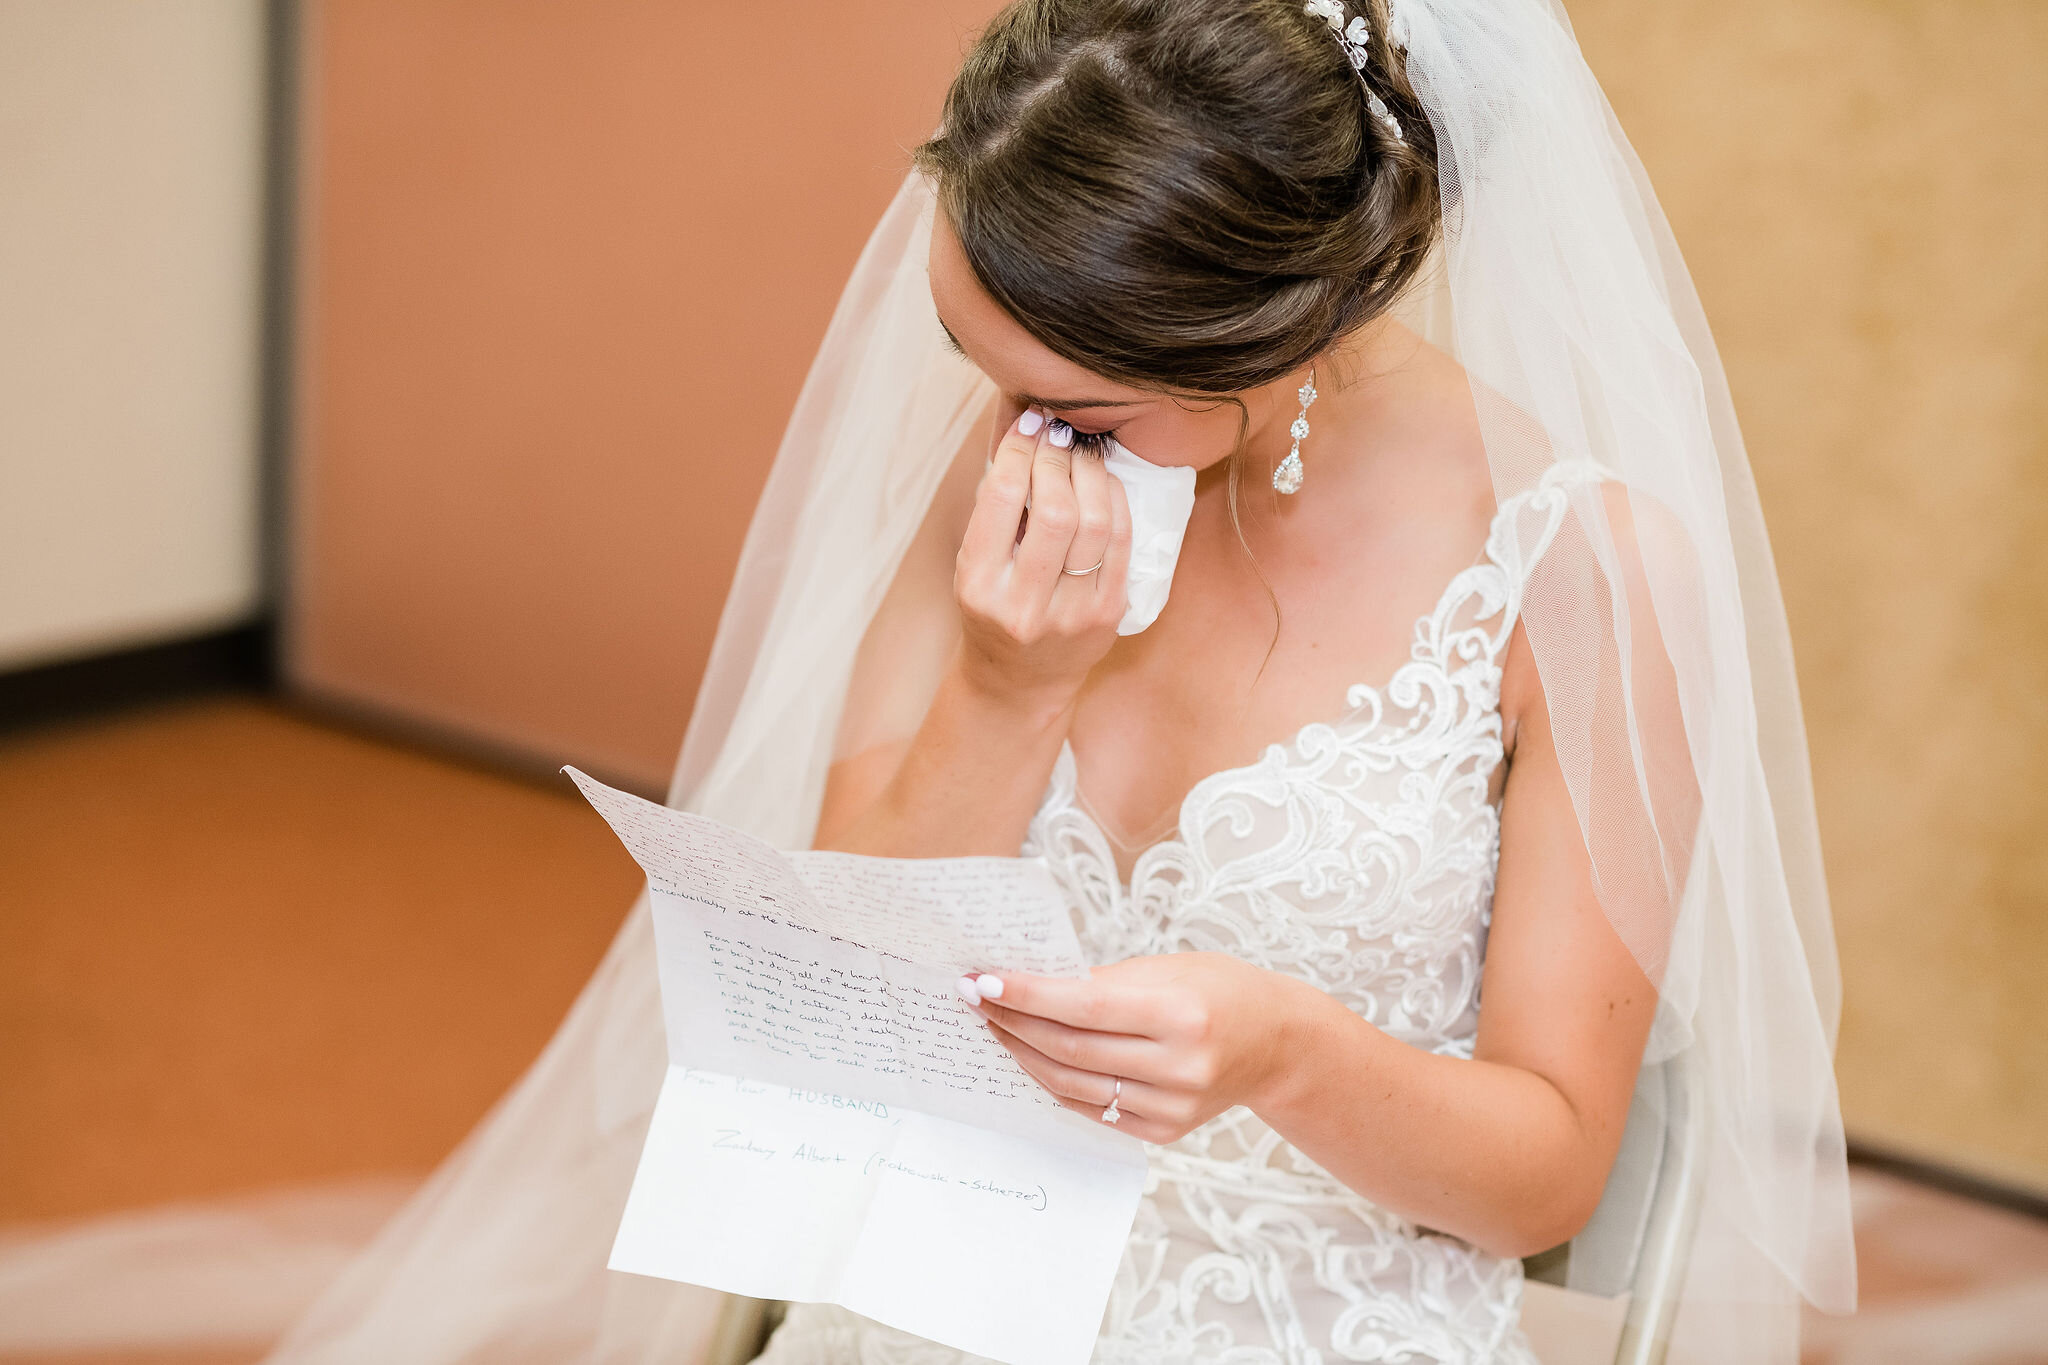 Bride wipes away tears as she reads a letter from the groom